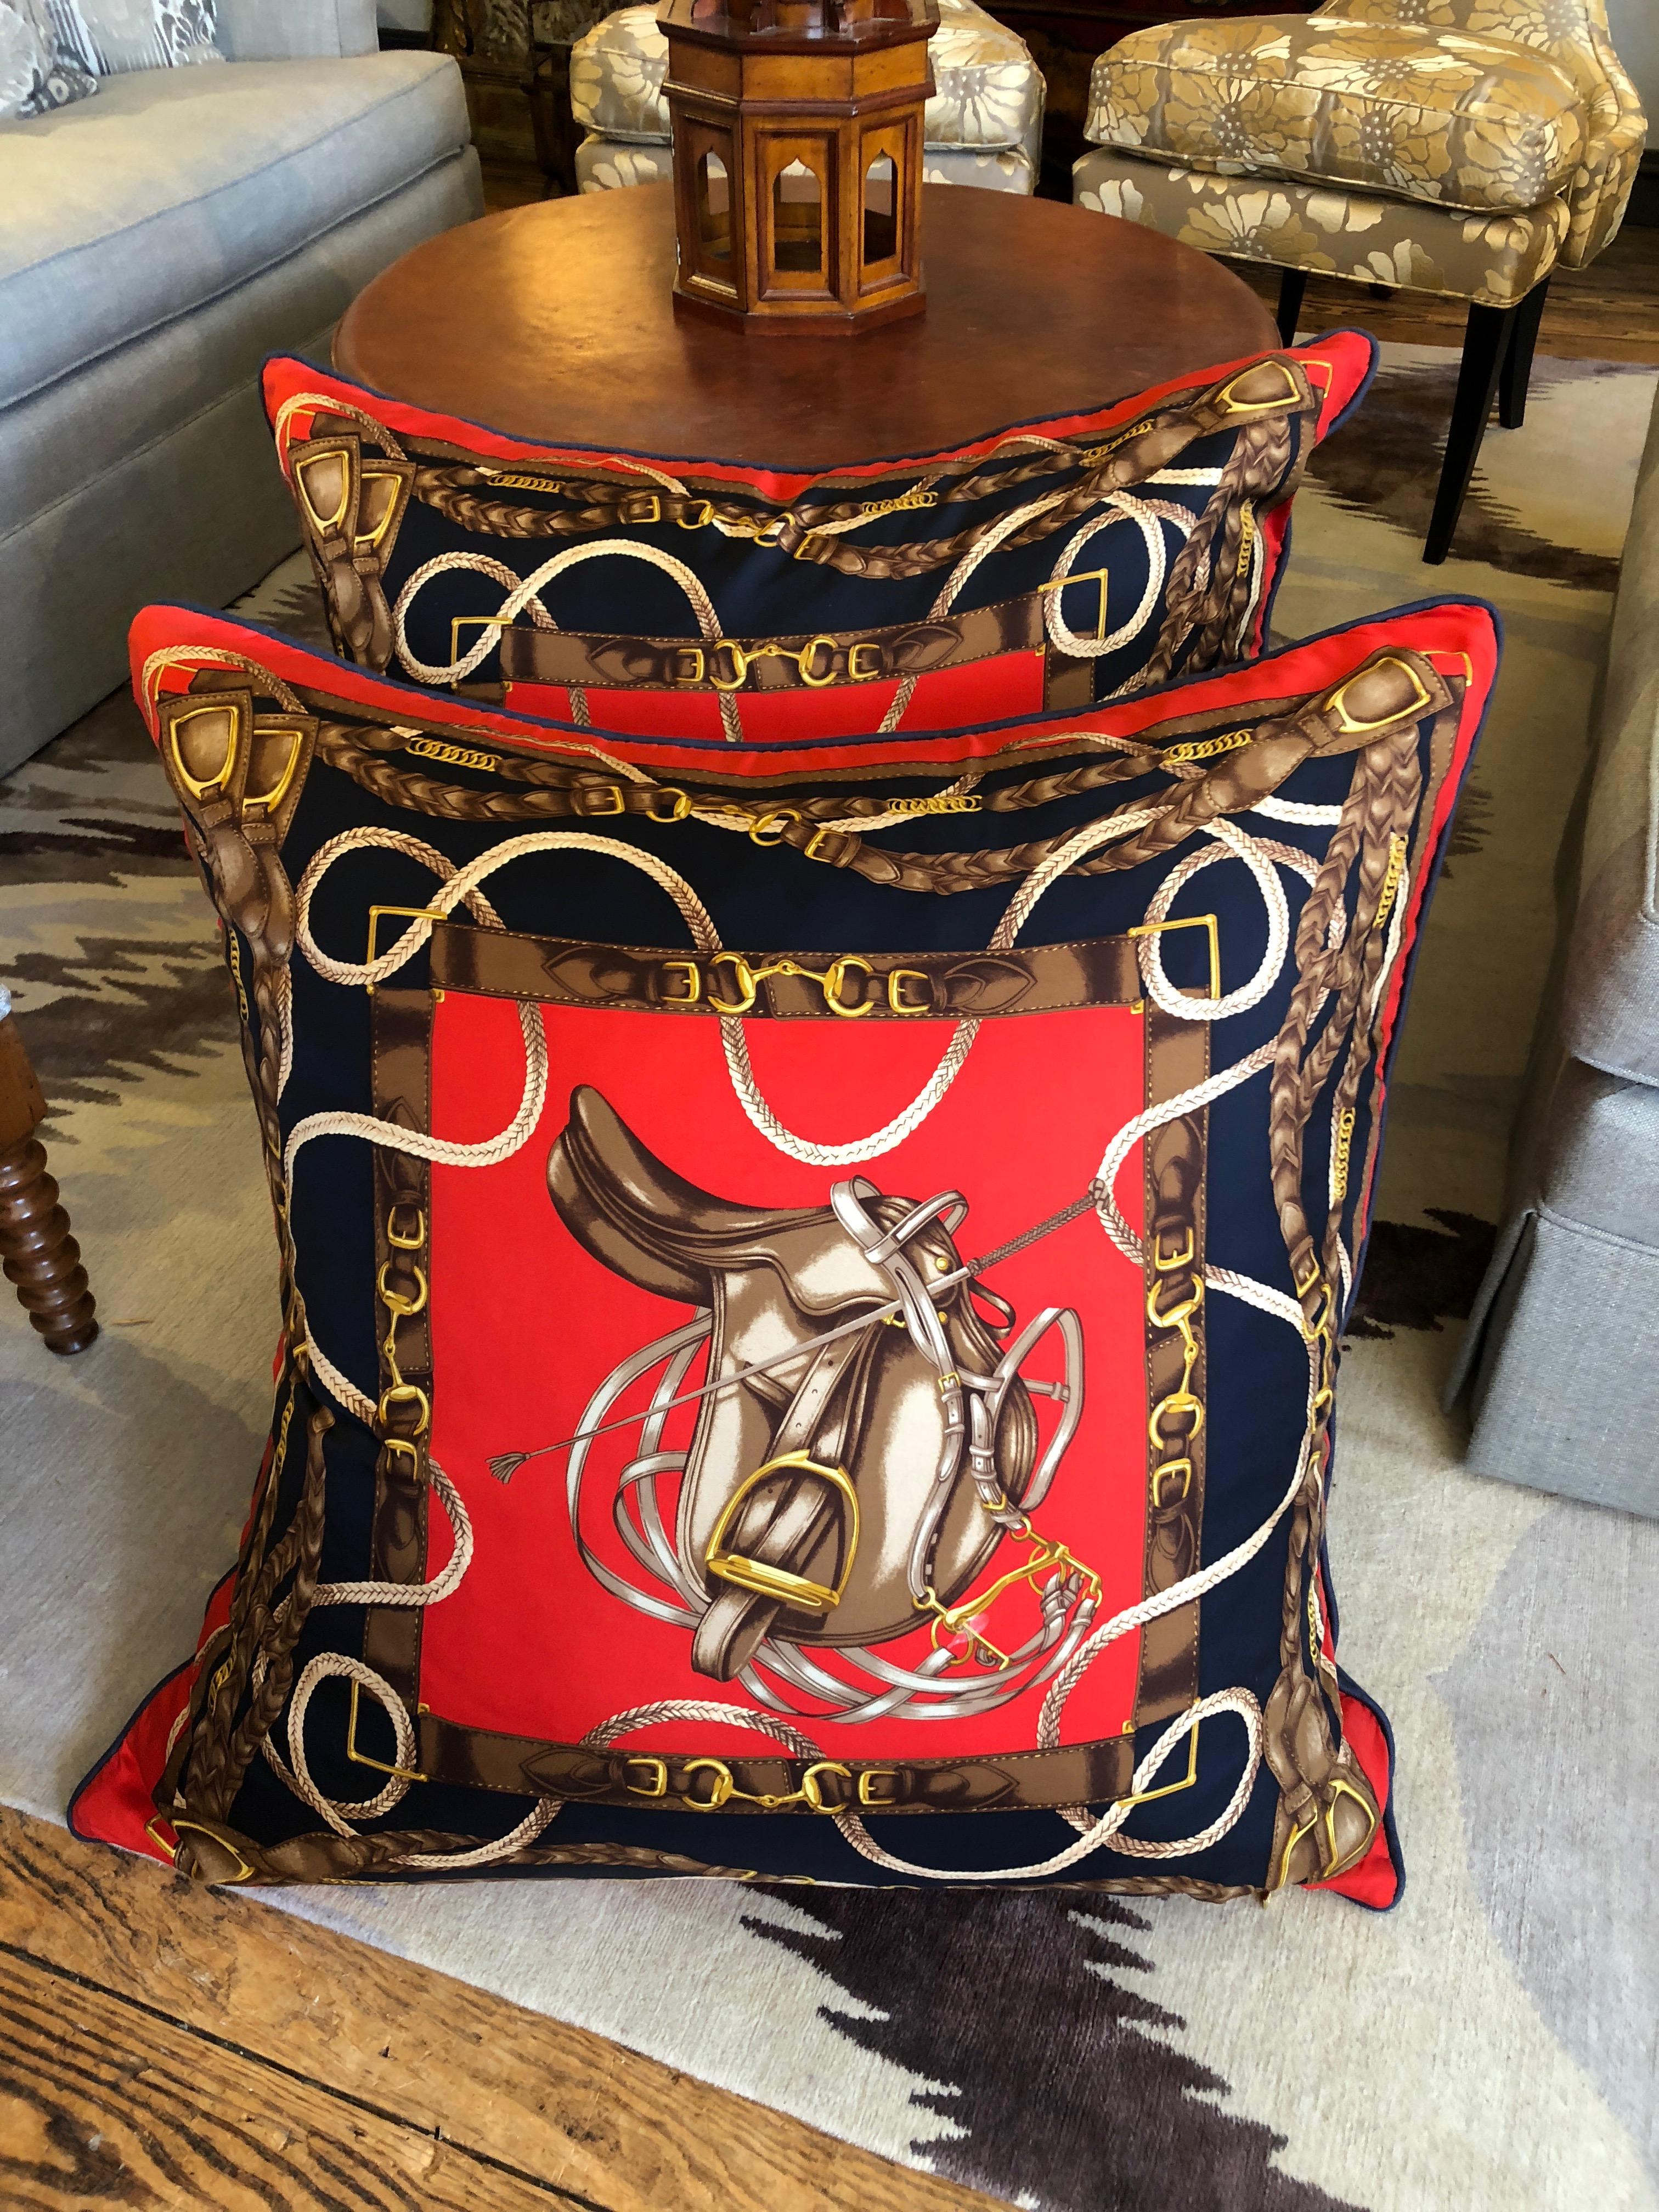 A set of very handsome Ralph Lauren pillows, two are very large and two are average throw pillow size. The design is Classic horse saddle in red, gold and navy blue.
Measures: Small 16.5 H, 17 W, 5 D.